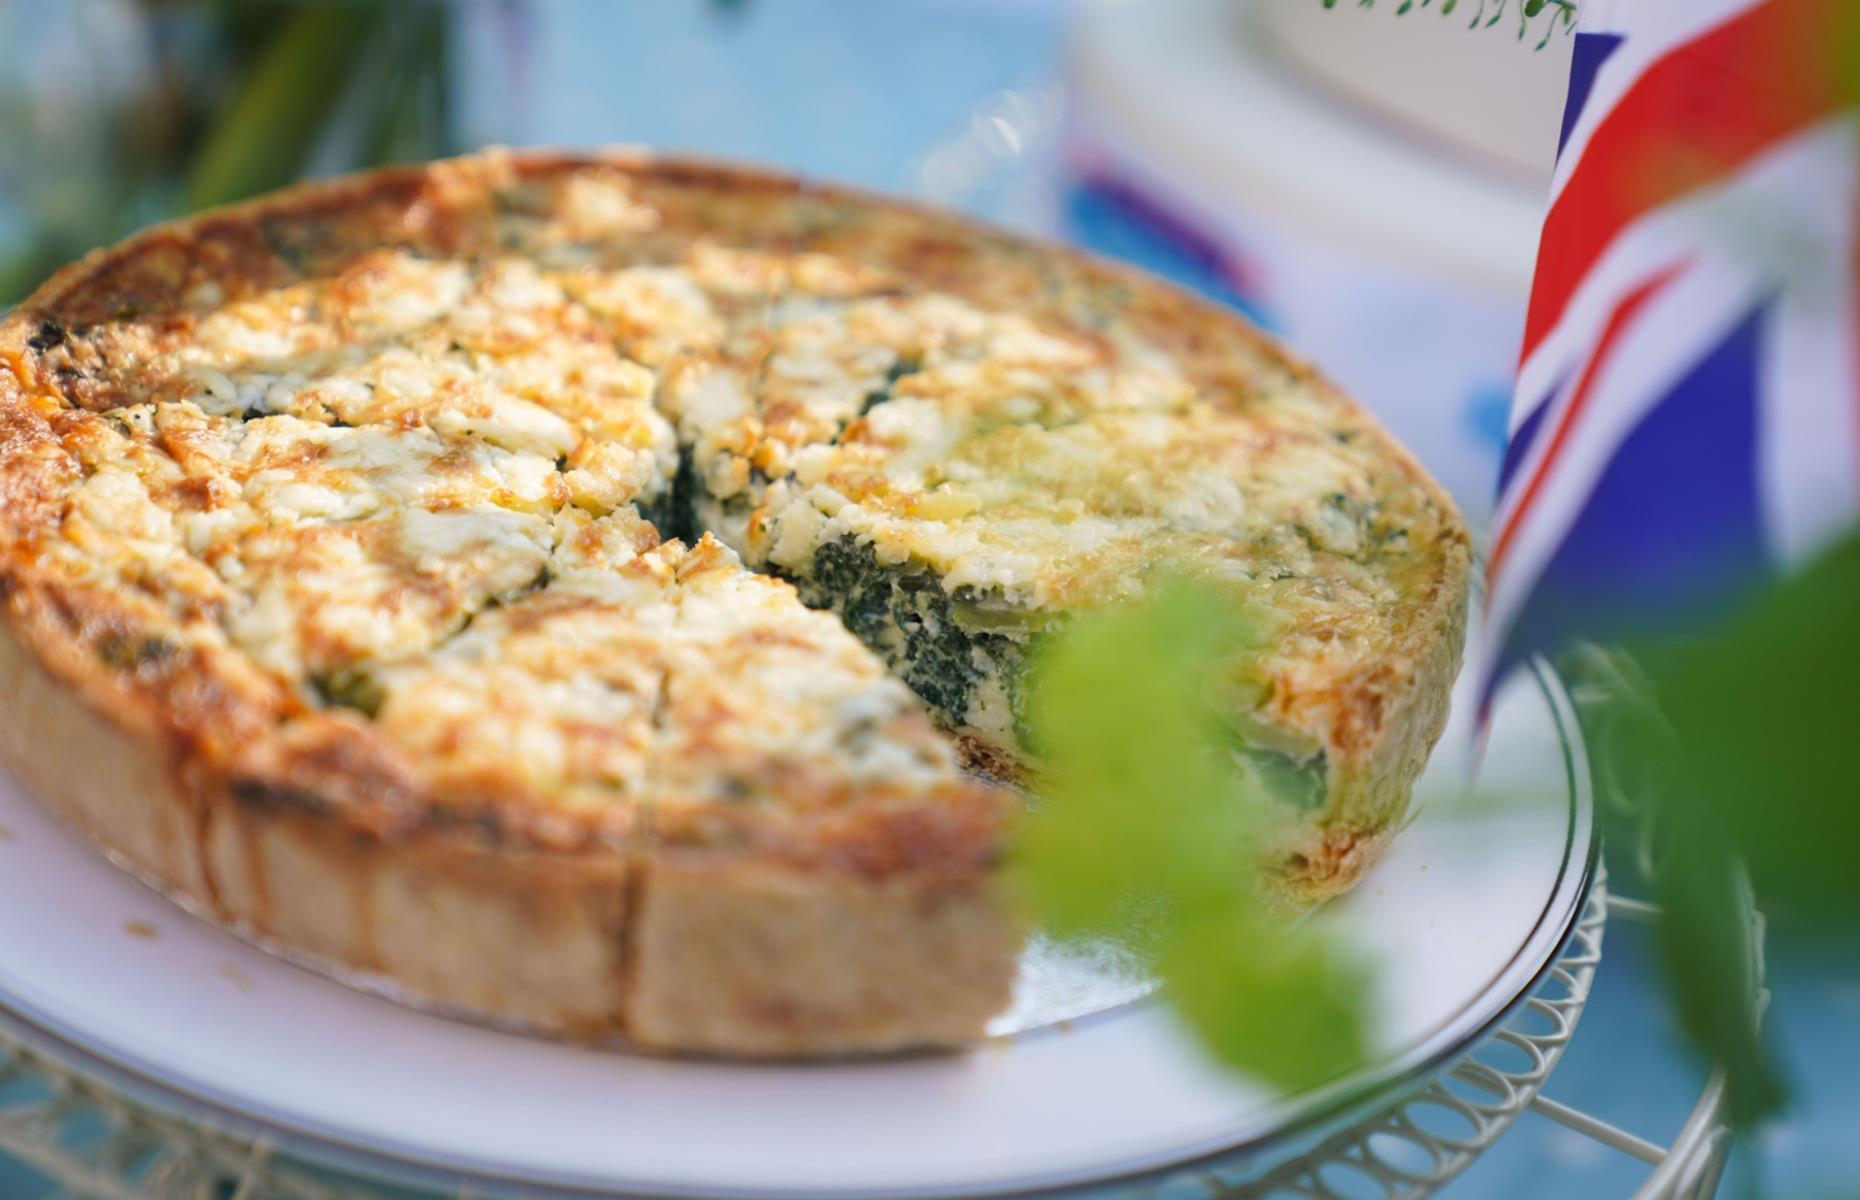 <p>The coronation quiche was personally chosen by King Charles and Queen Camilla to be the centrepiece dish of the 6 May celebrations. The quiche consists of spinach, broad beans, cheese and tarragon, with the <a href="https://www.royal.uk/the-coronation-quiche">recipe</a> available on the official Royal website. They suggest eating it hot or cold, with salad and new potatoes on the side.</p>